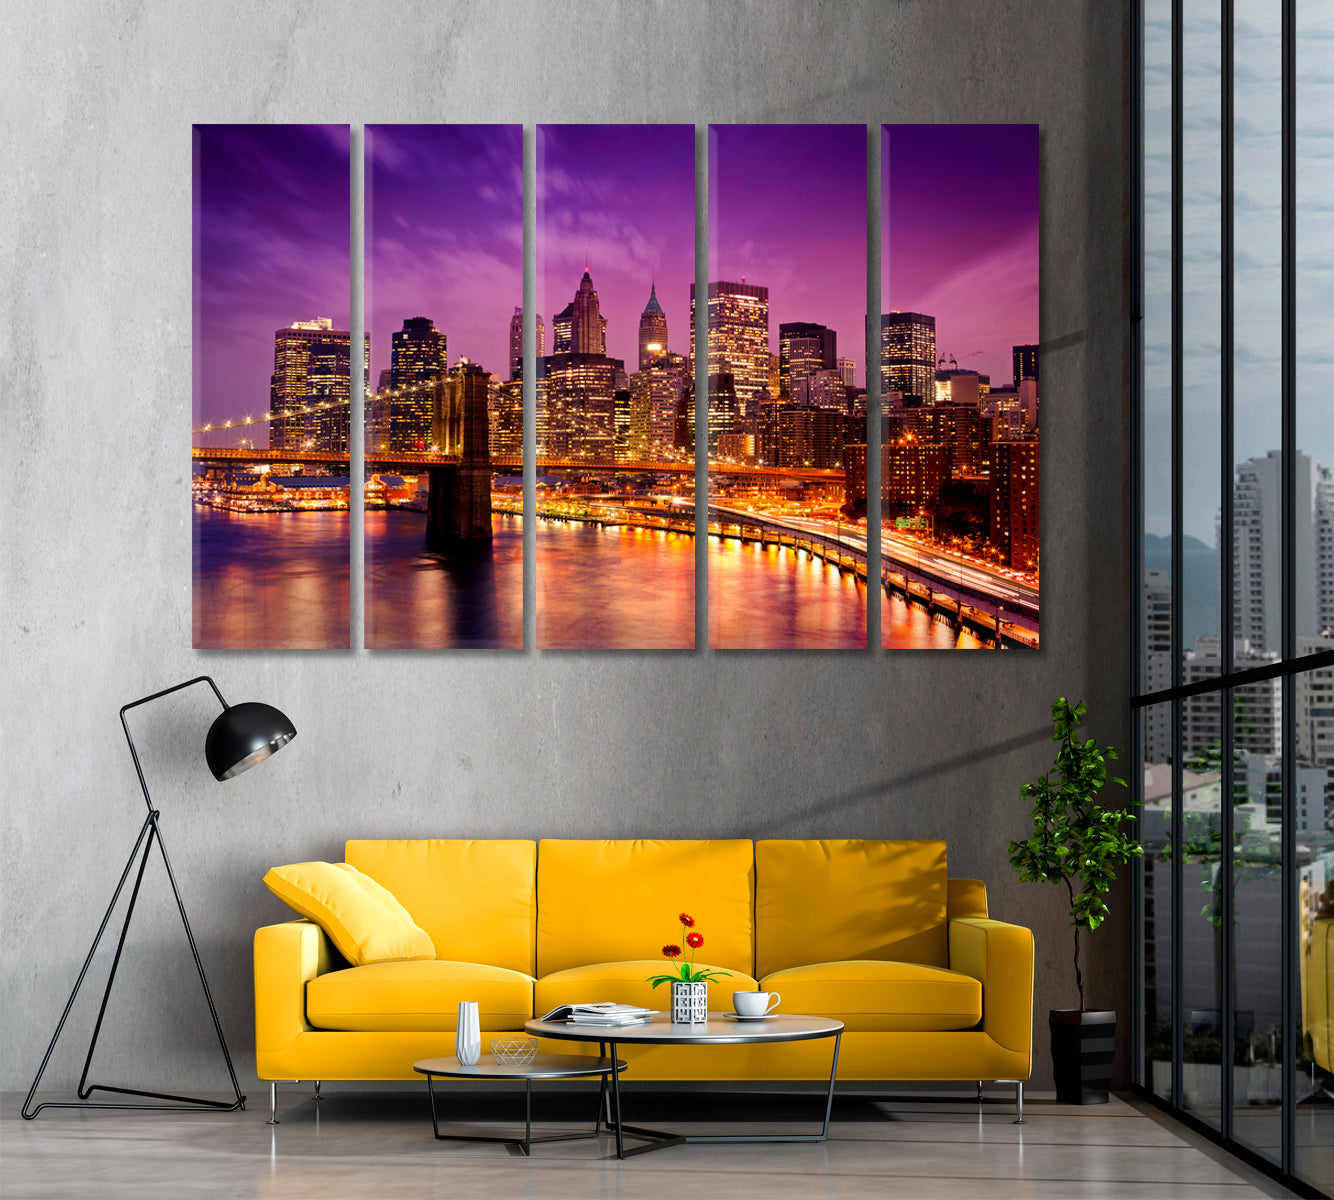 New York Downtown Skyline Canvas Print ArtLexy 5 Panels 36"x24" inches 